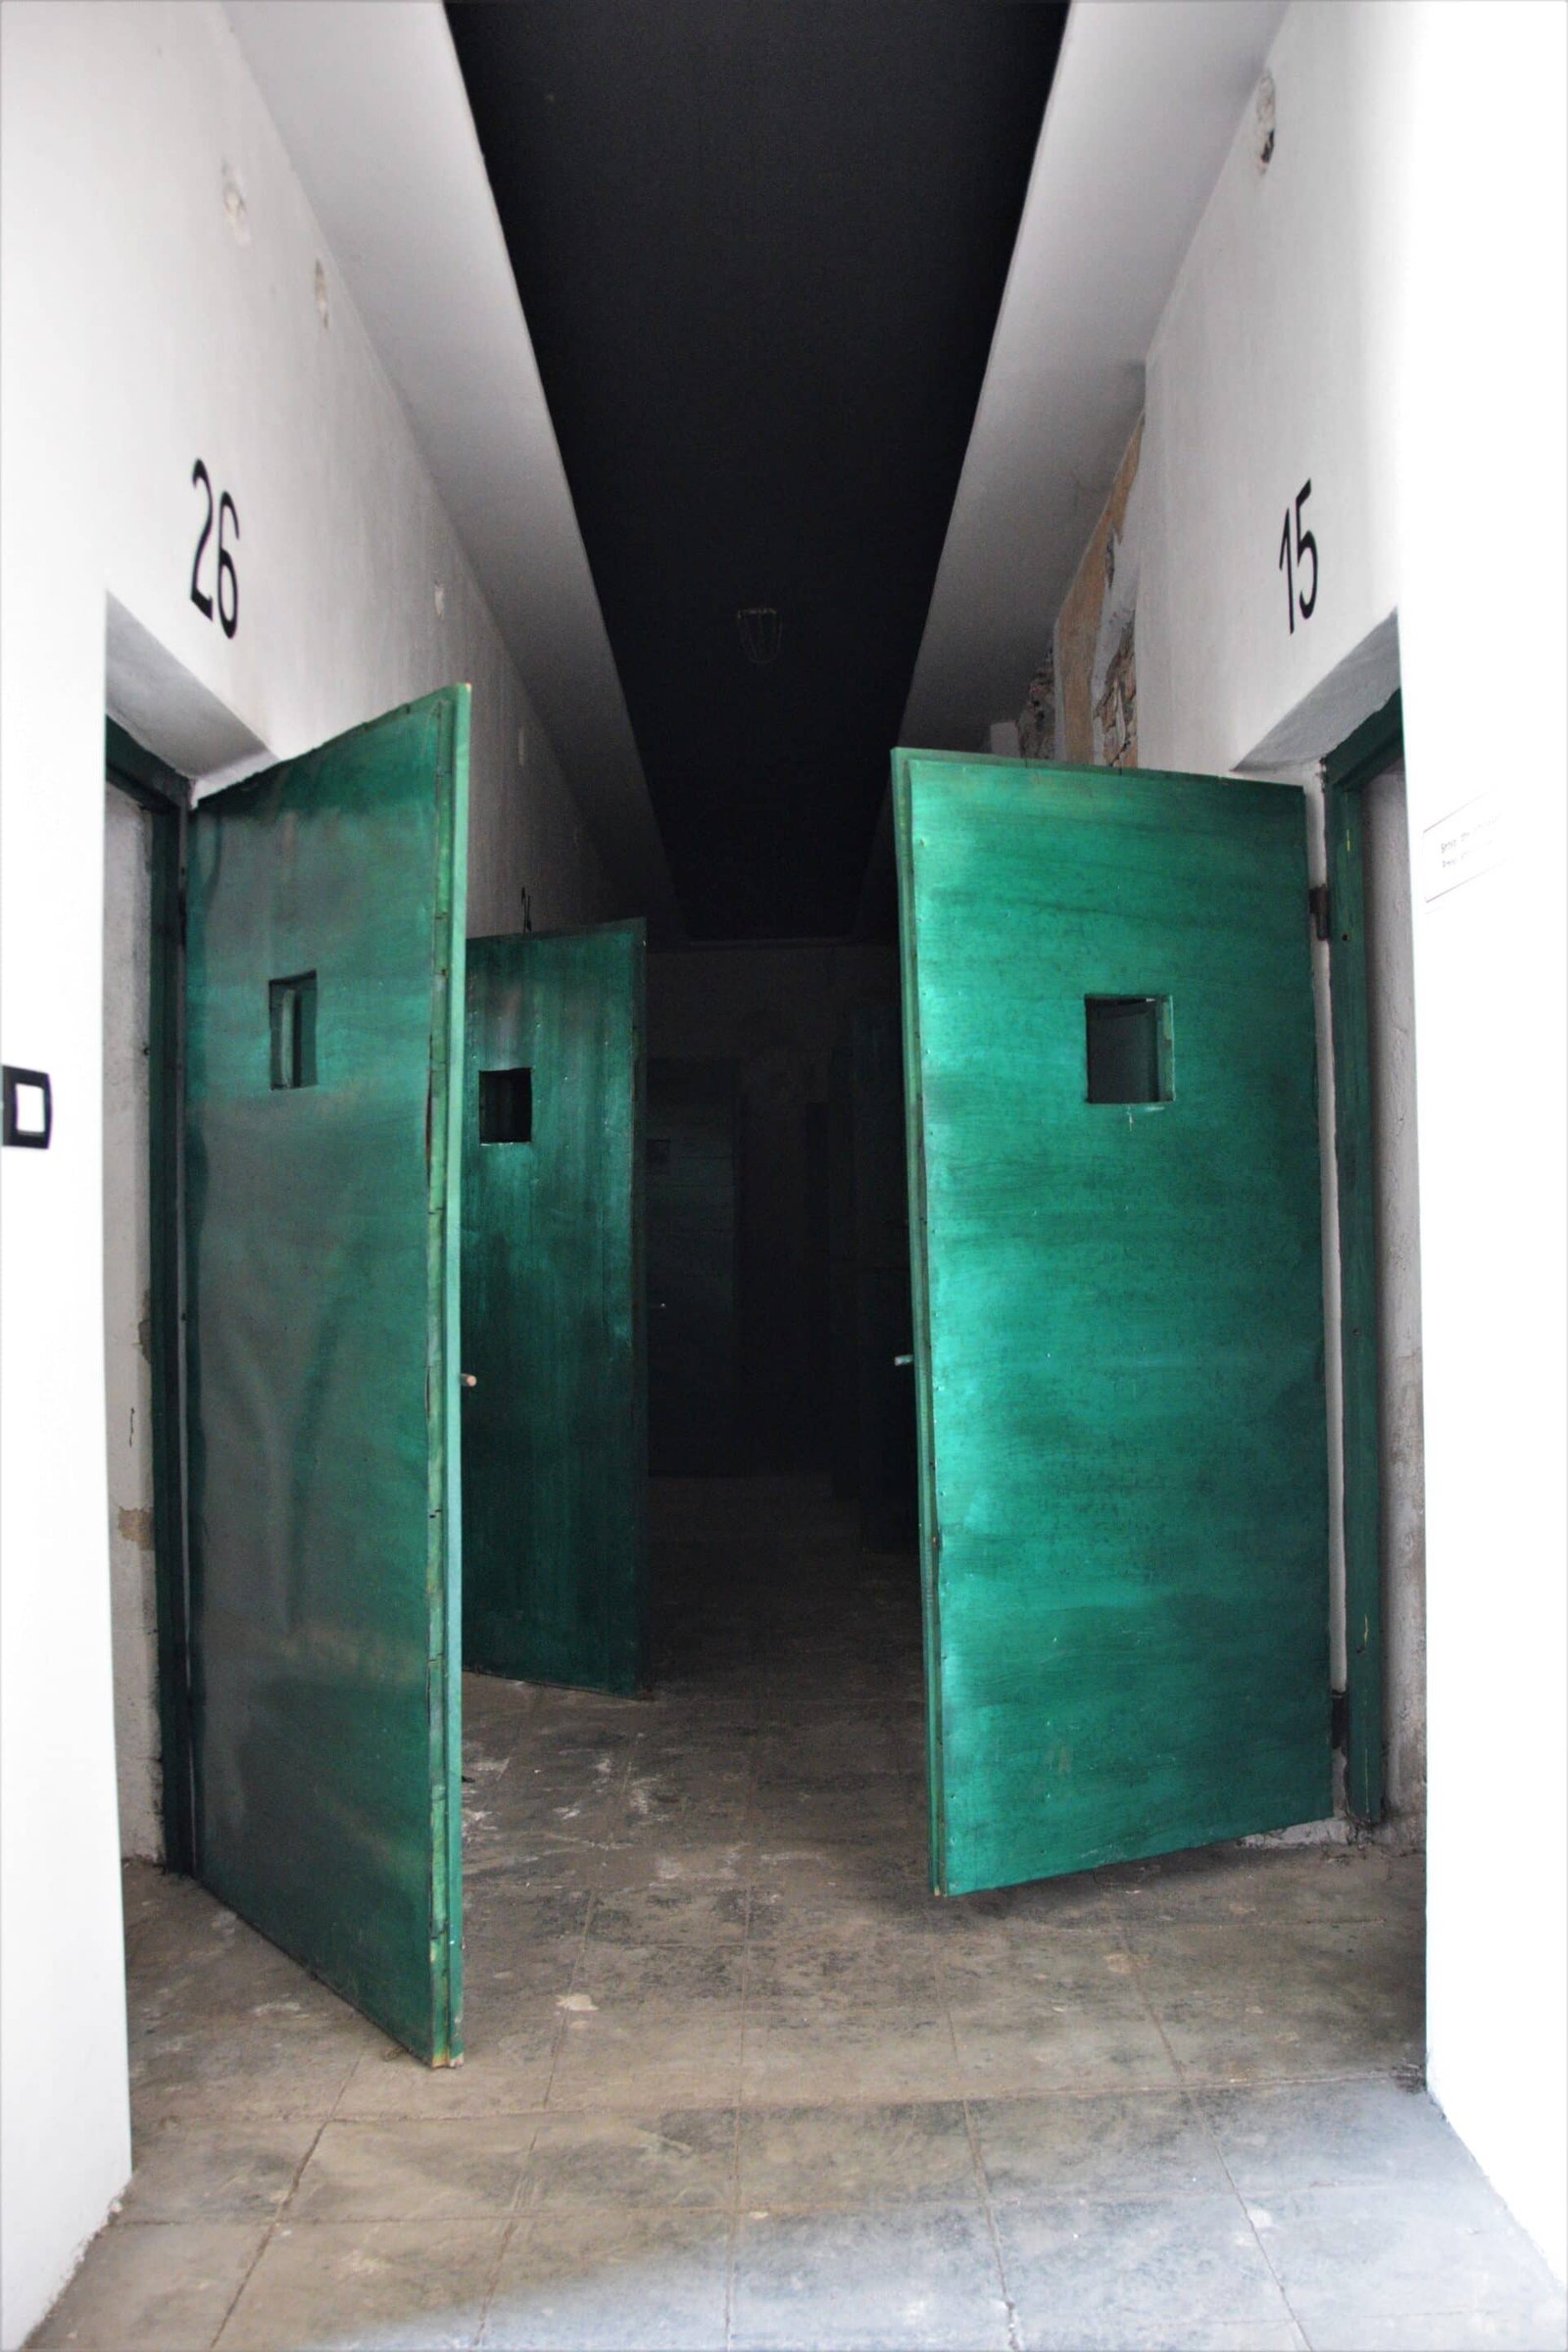 open cell doors in a hallway of a former prison